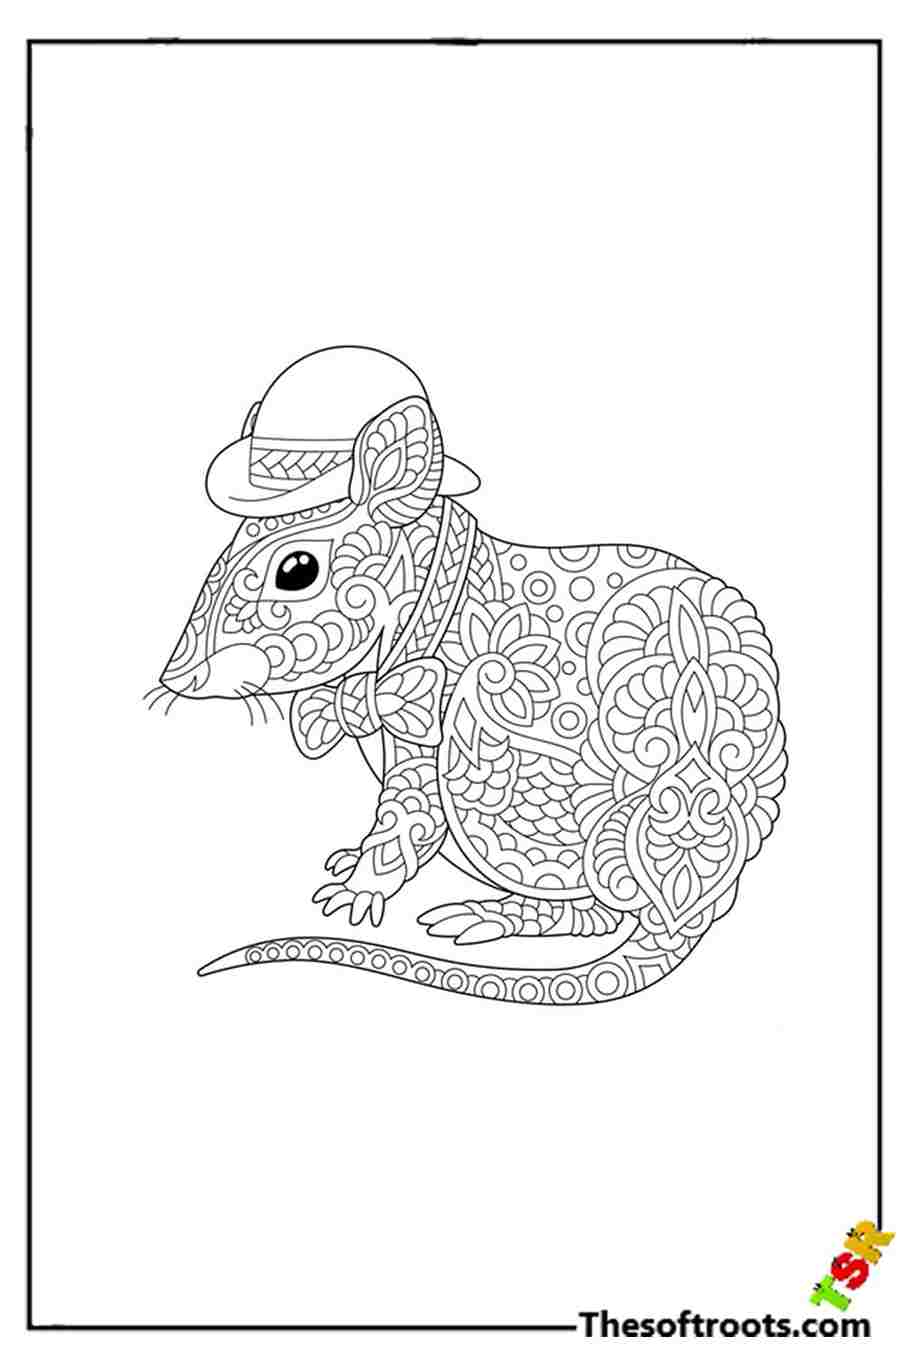 Adult Mouse coloring pages